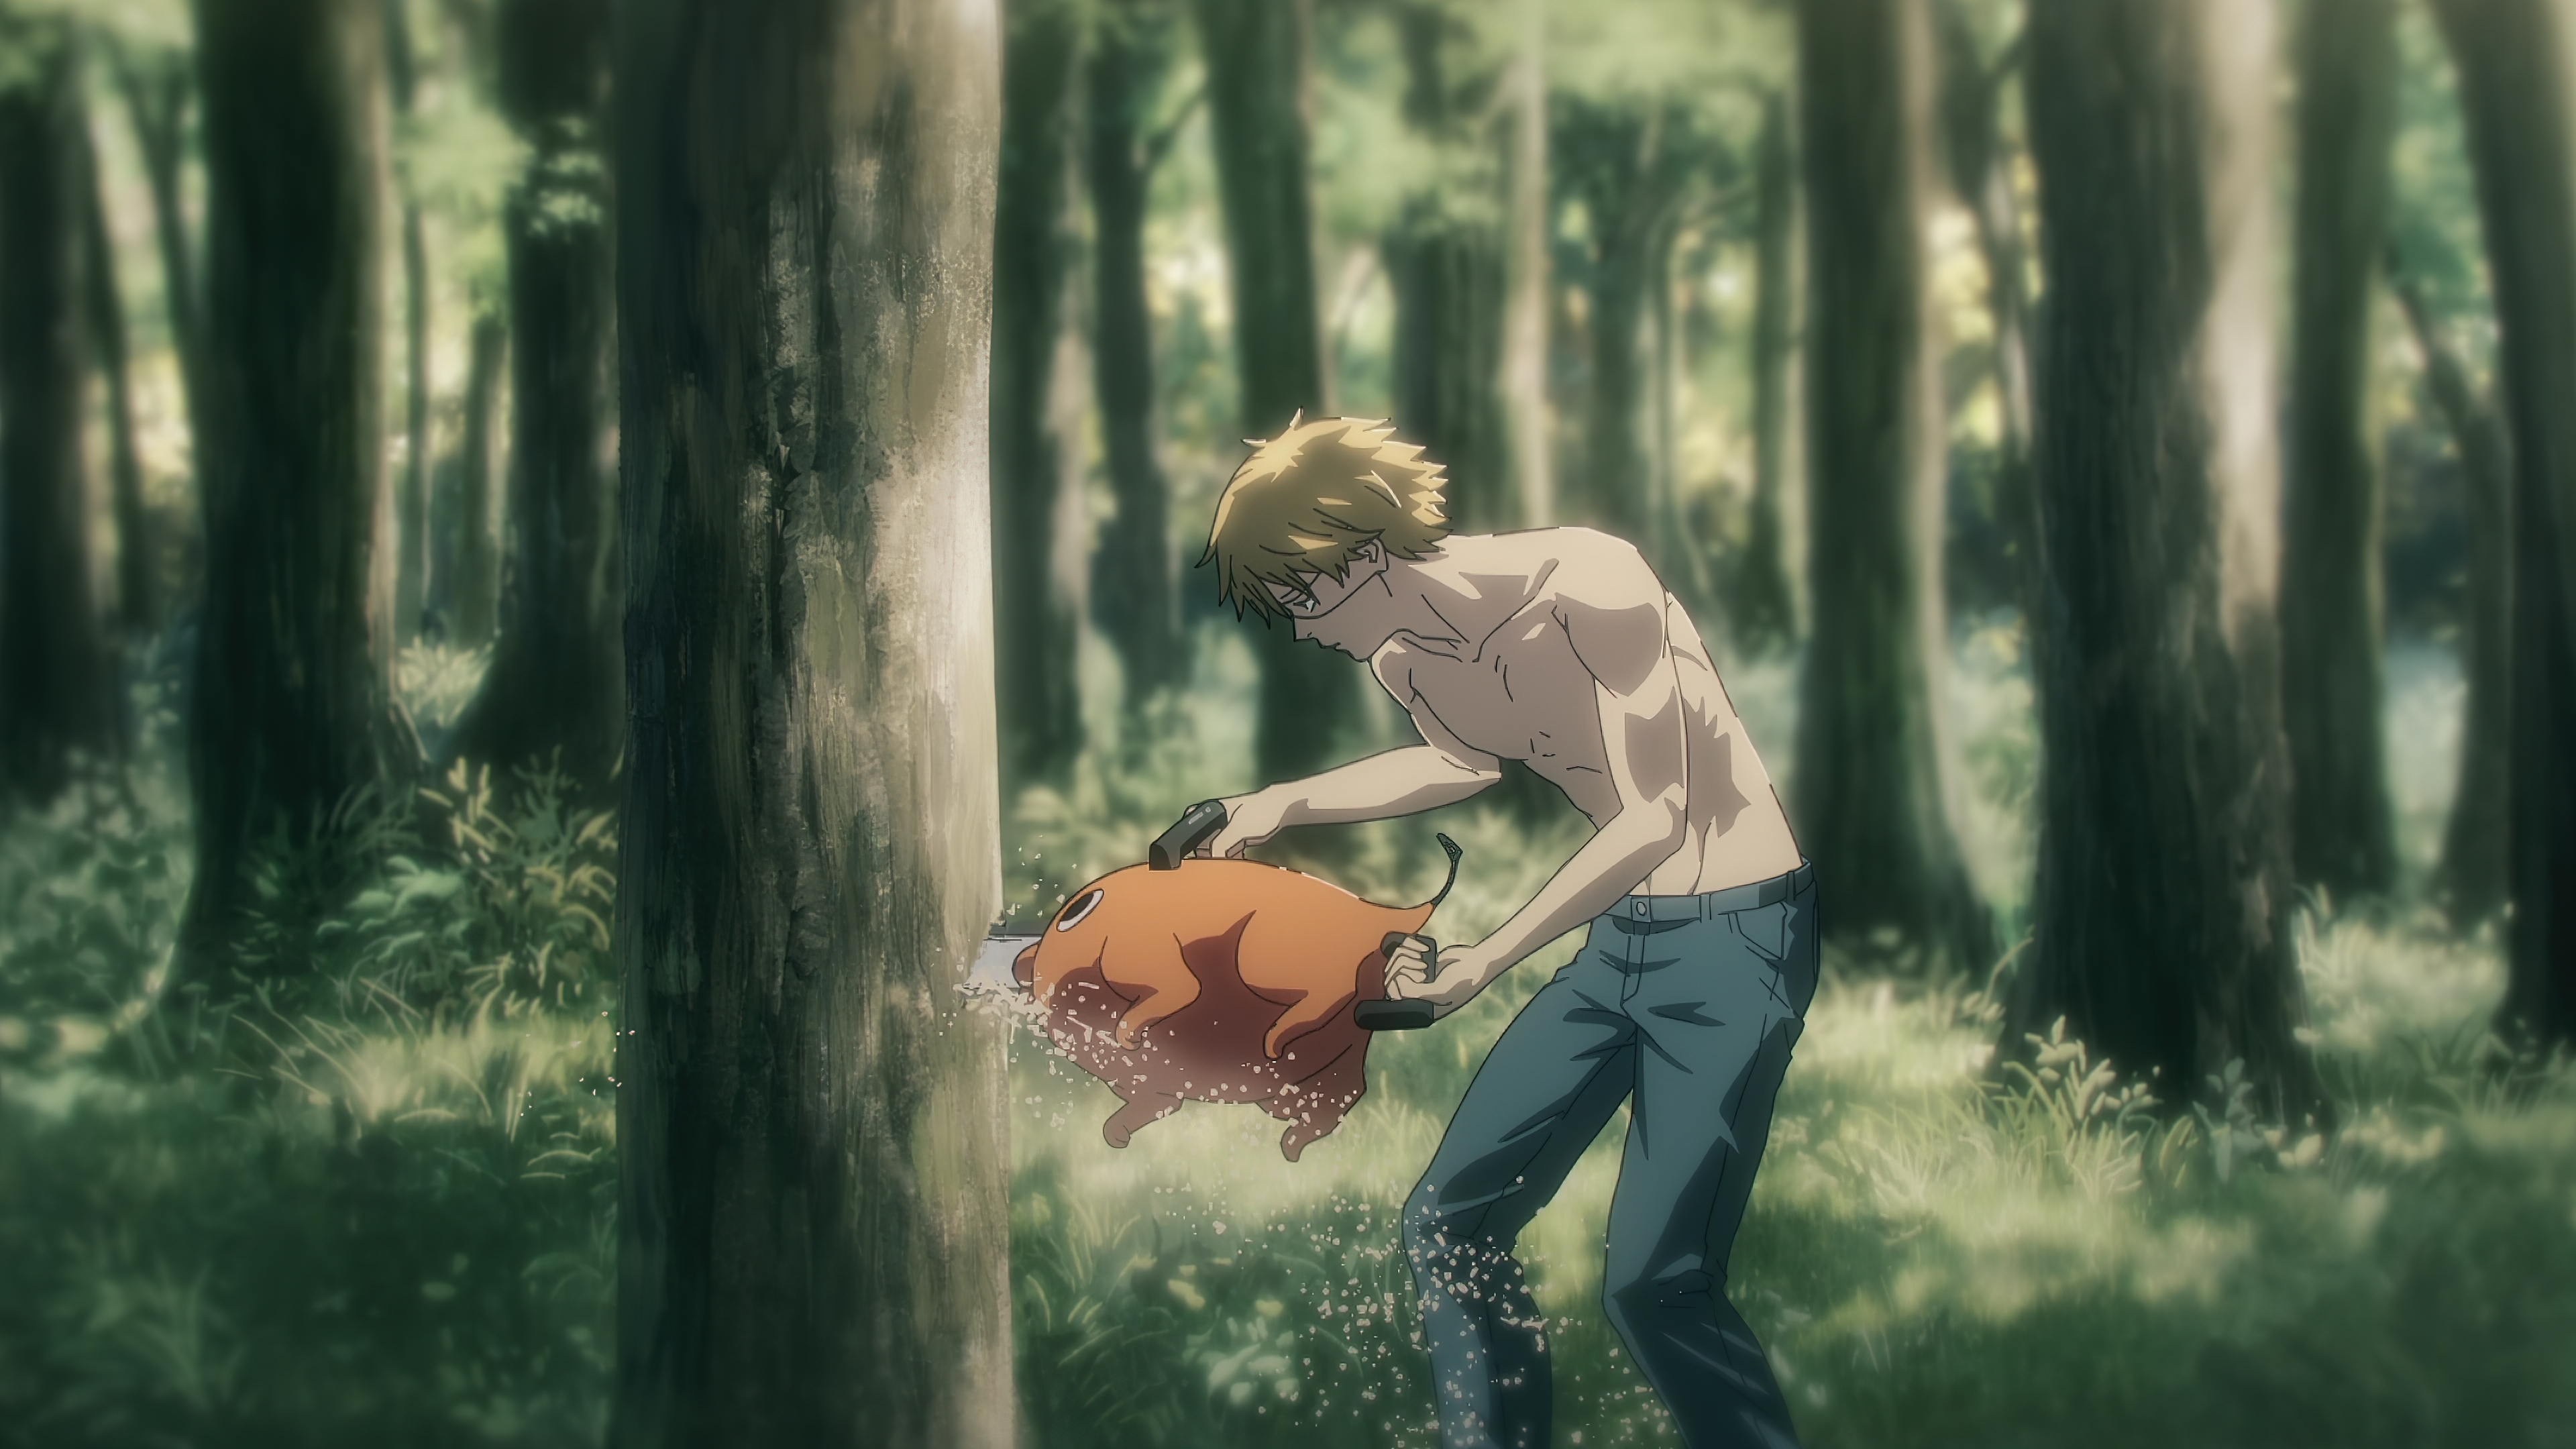 Anime 3840x2160 Chainsaw Man anime 4K anime screenshot Denji (Chainsaw Man) Pochita (Chainsaw Man) anime boys trees forest nature chainsaws